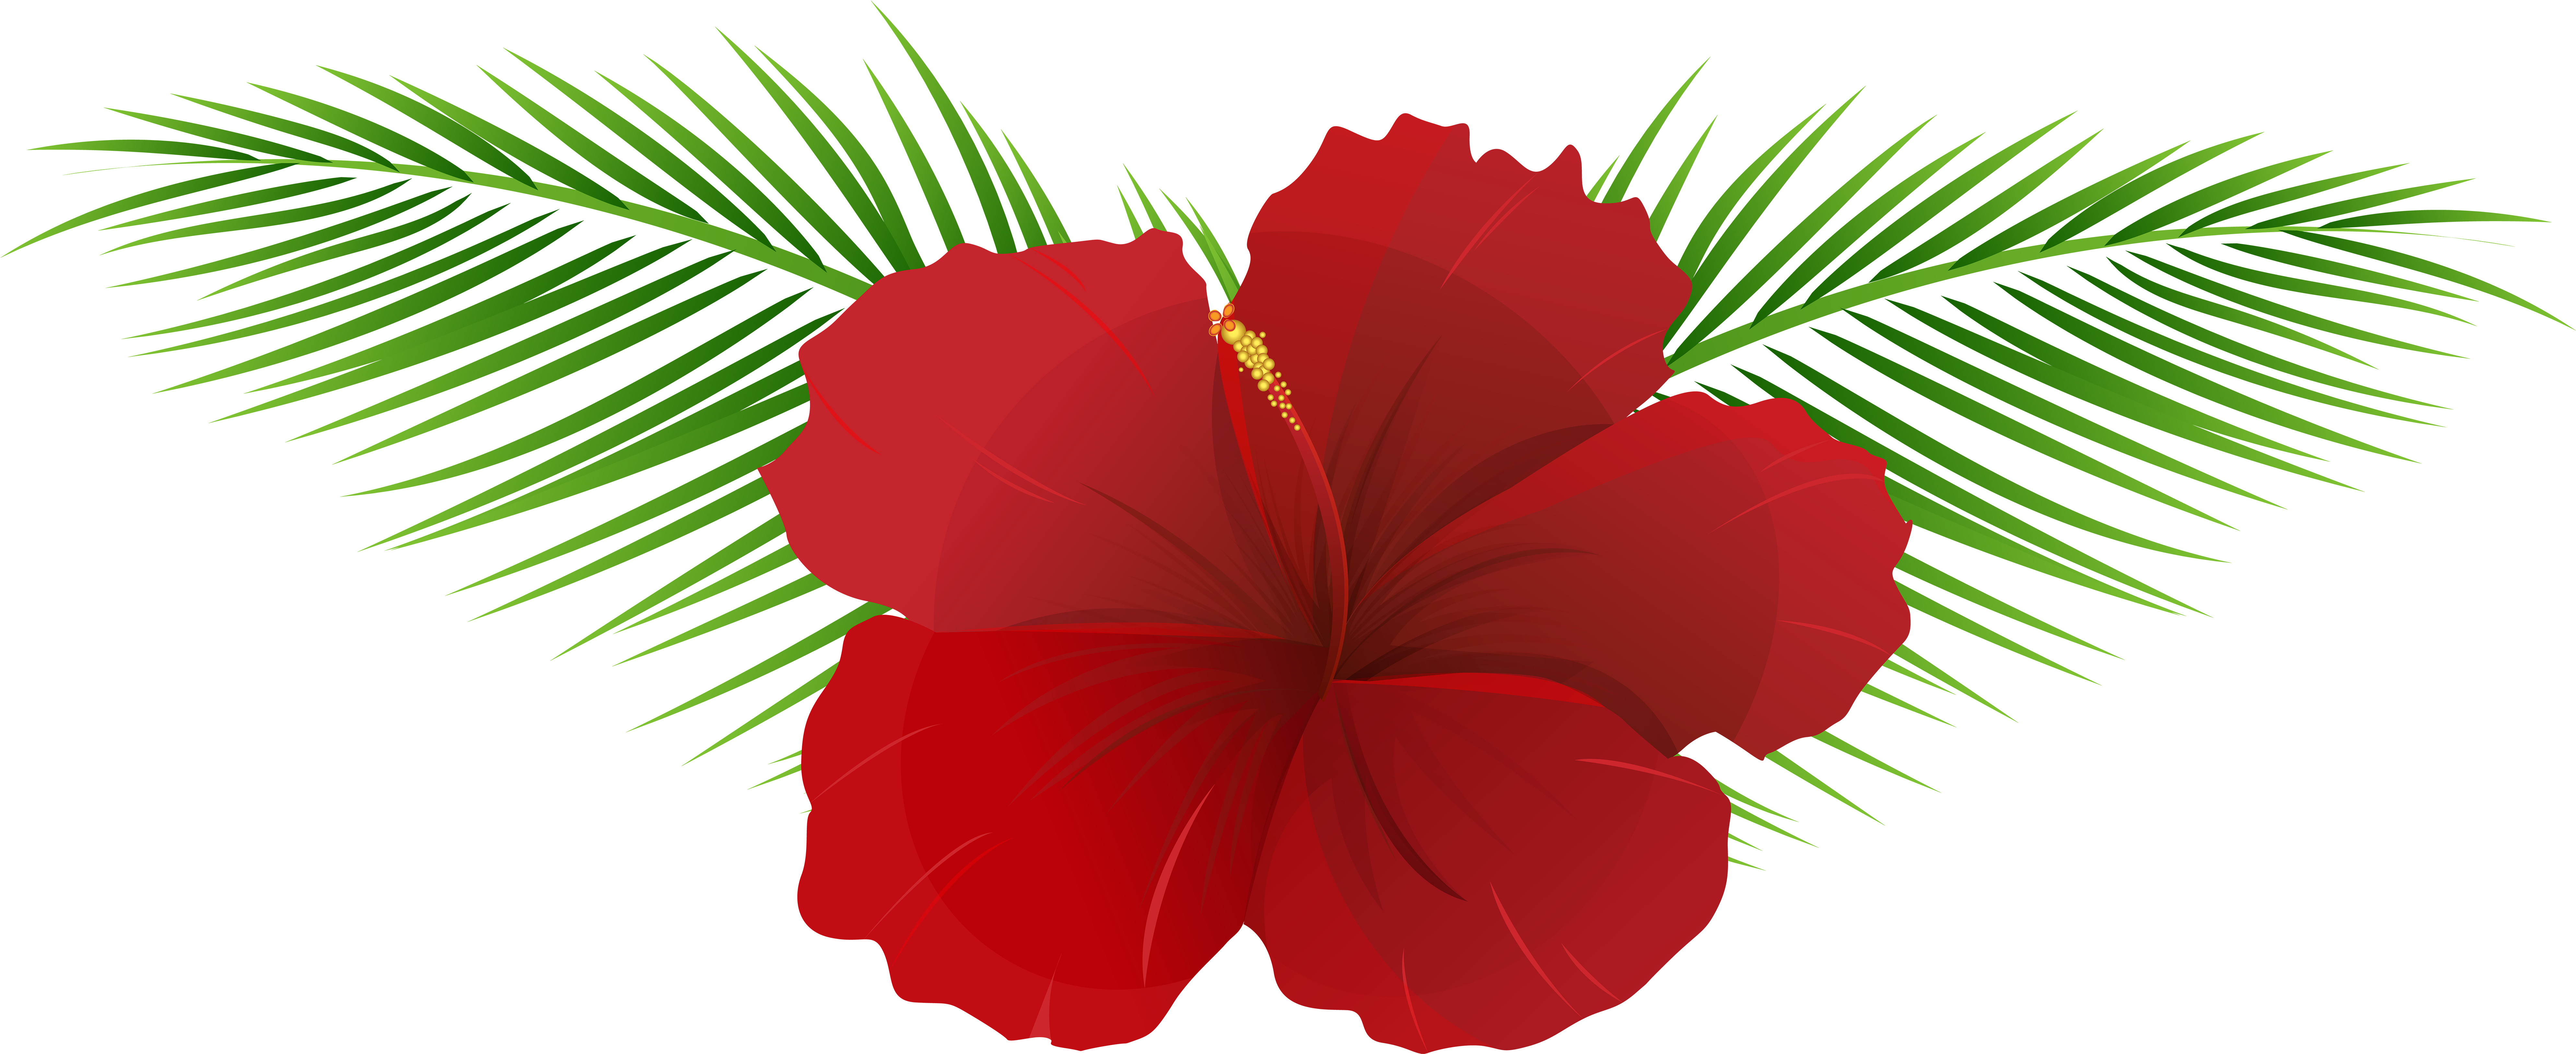 Transparent Tropical Flower Border Png : If you like, you can download ...